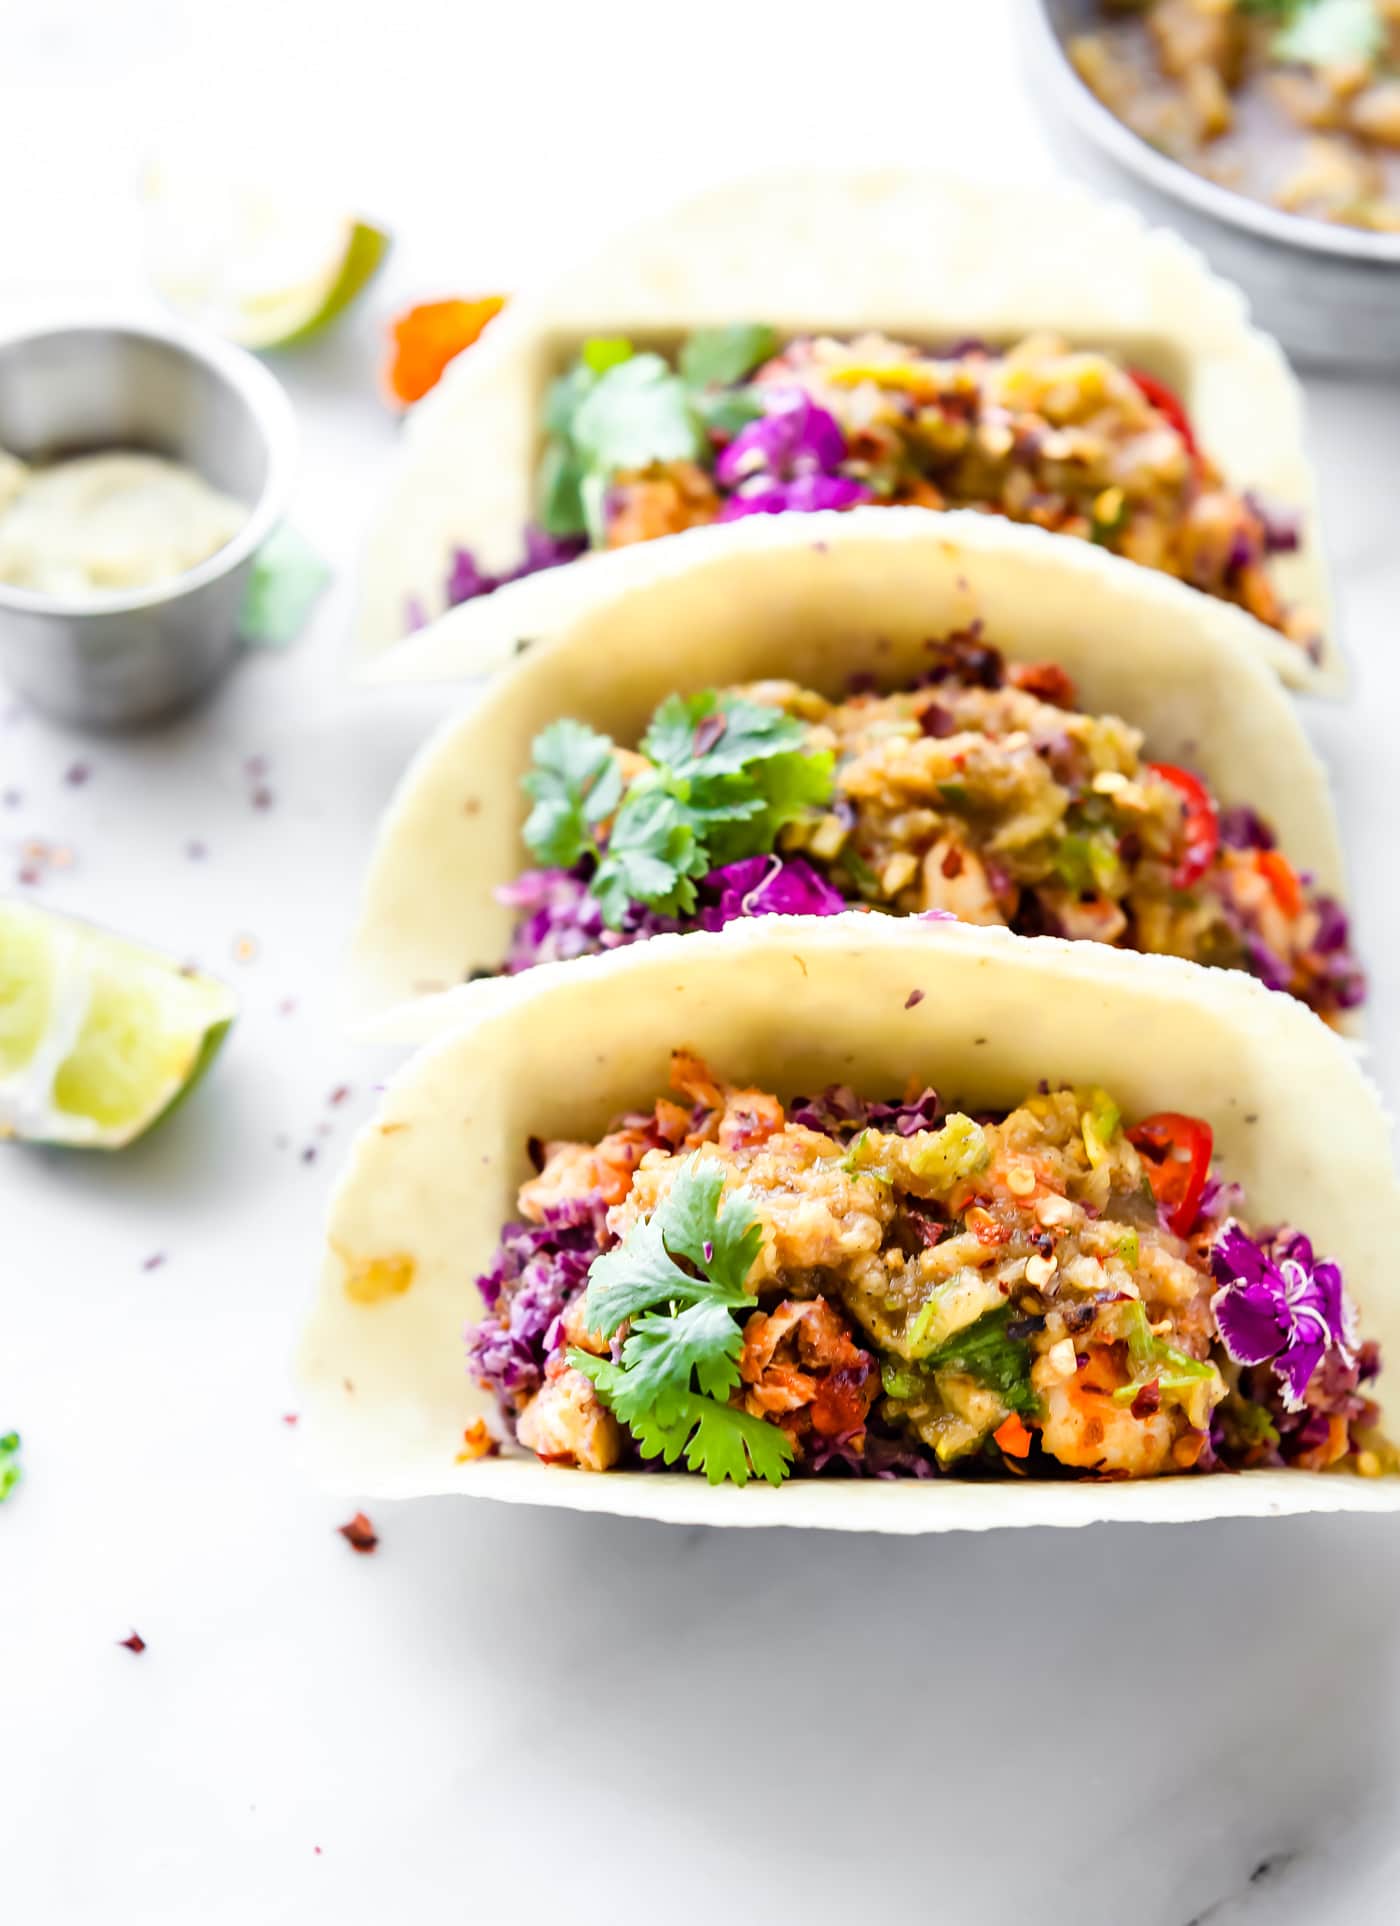 Pickled Pineapple Baja Fish Tacos are my latest love! Easy to make with homemade pickled pineapple relish, cabbage slaw with avocado cream, and Baja style fried fish all wrapped in a warm gluten free tortilla! So much flavor but also SO simple and healthy to make.